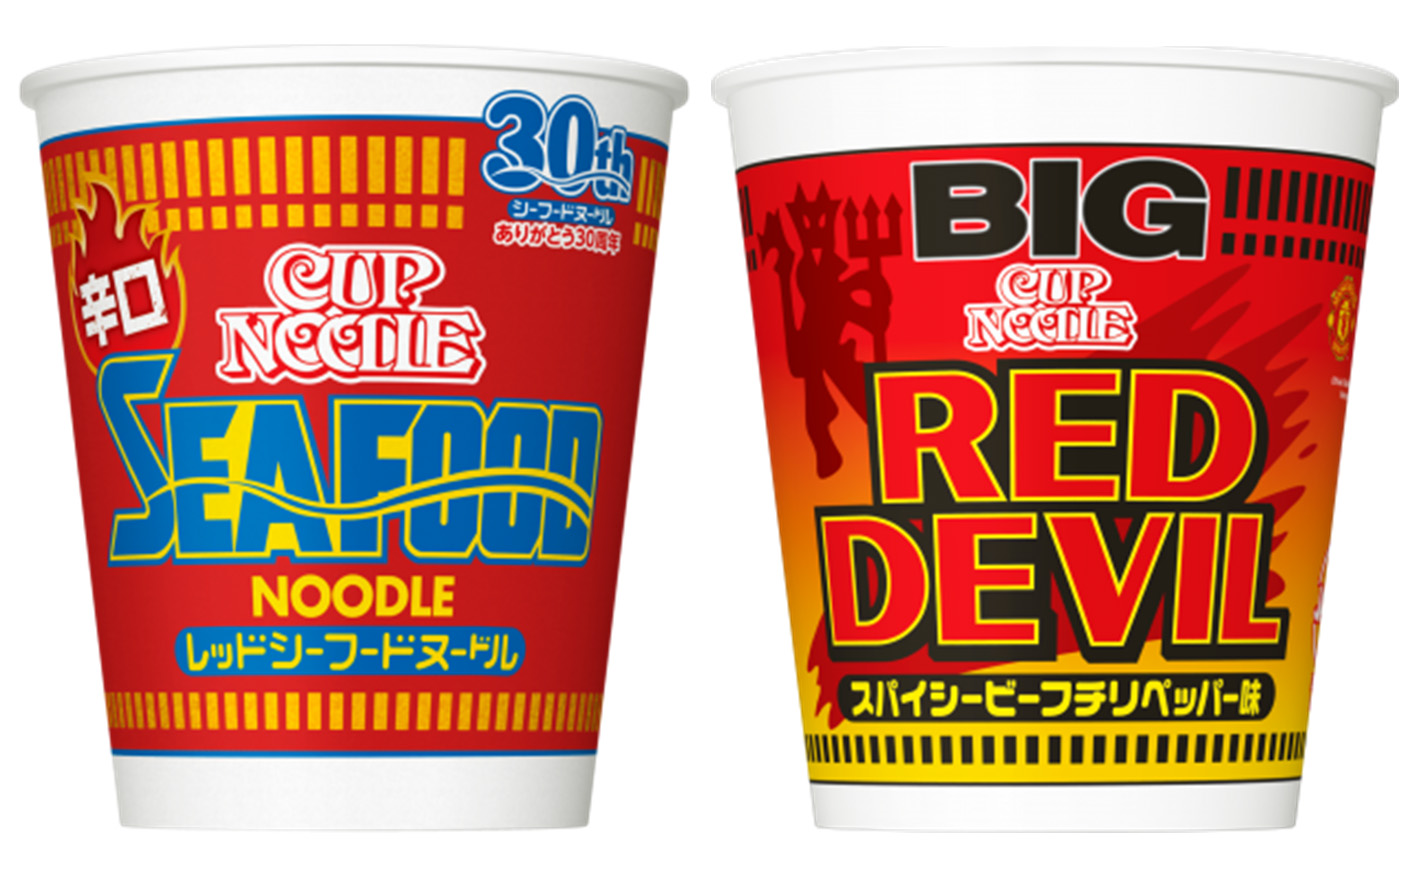 Nissin CUP NOODLE 日清 カップヌードル - World famous popular instant noodles